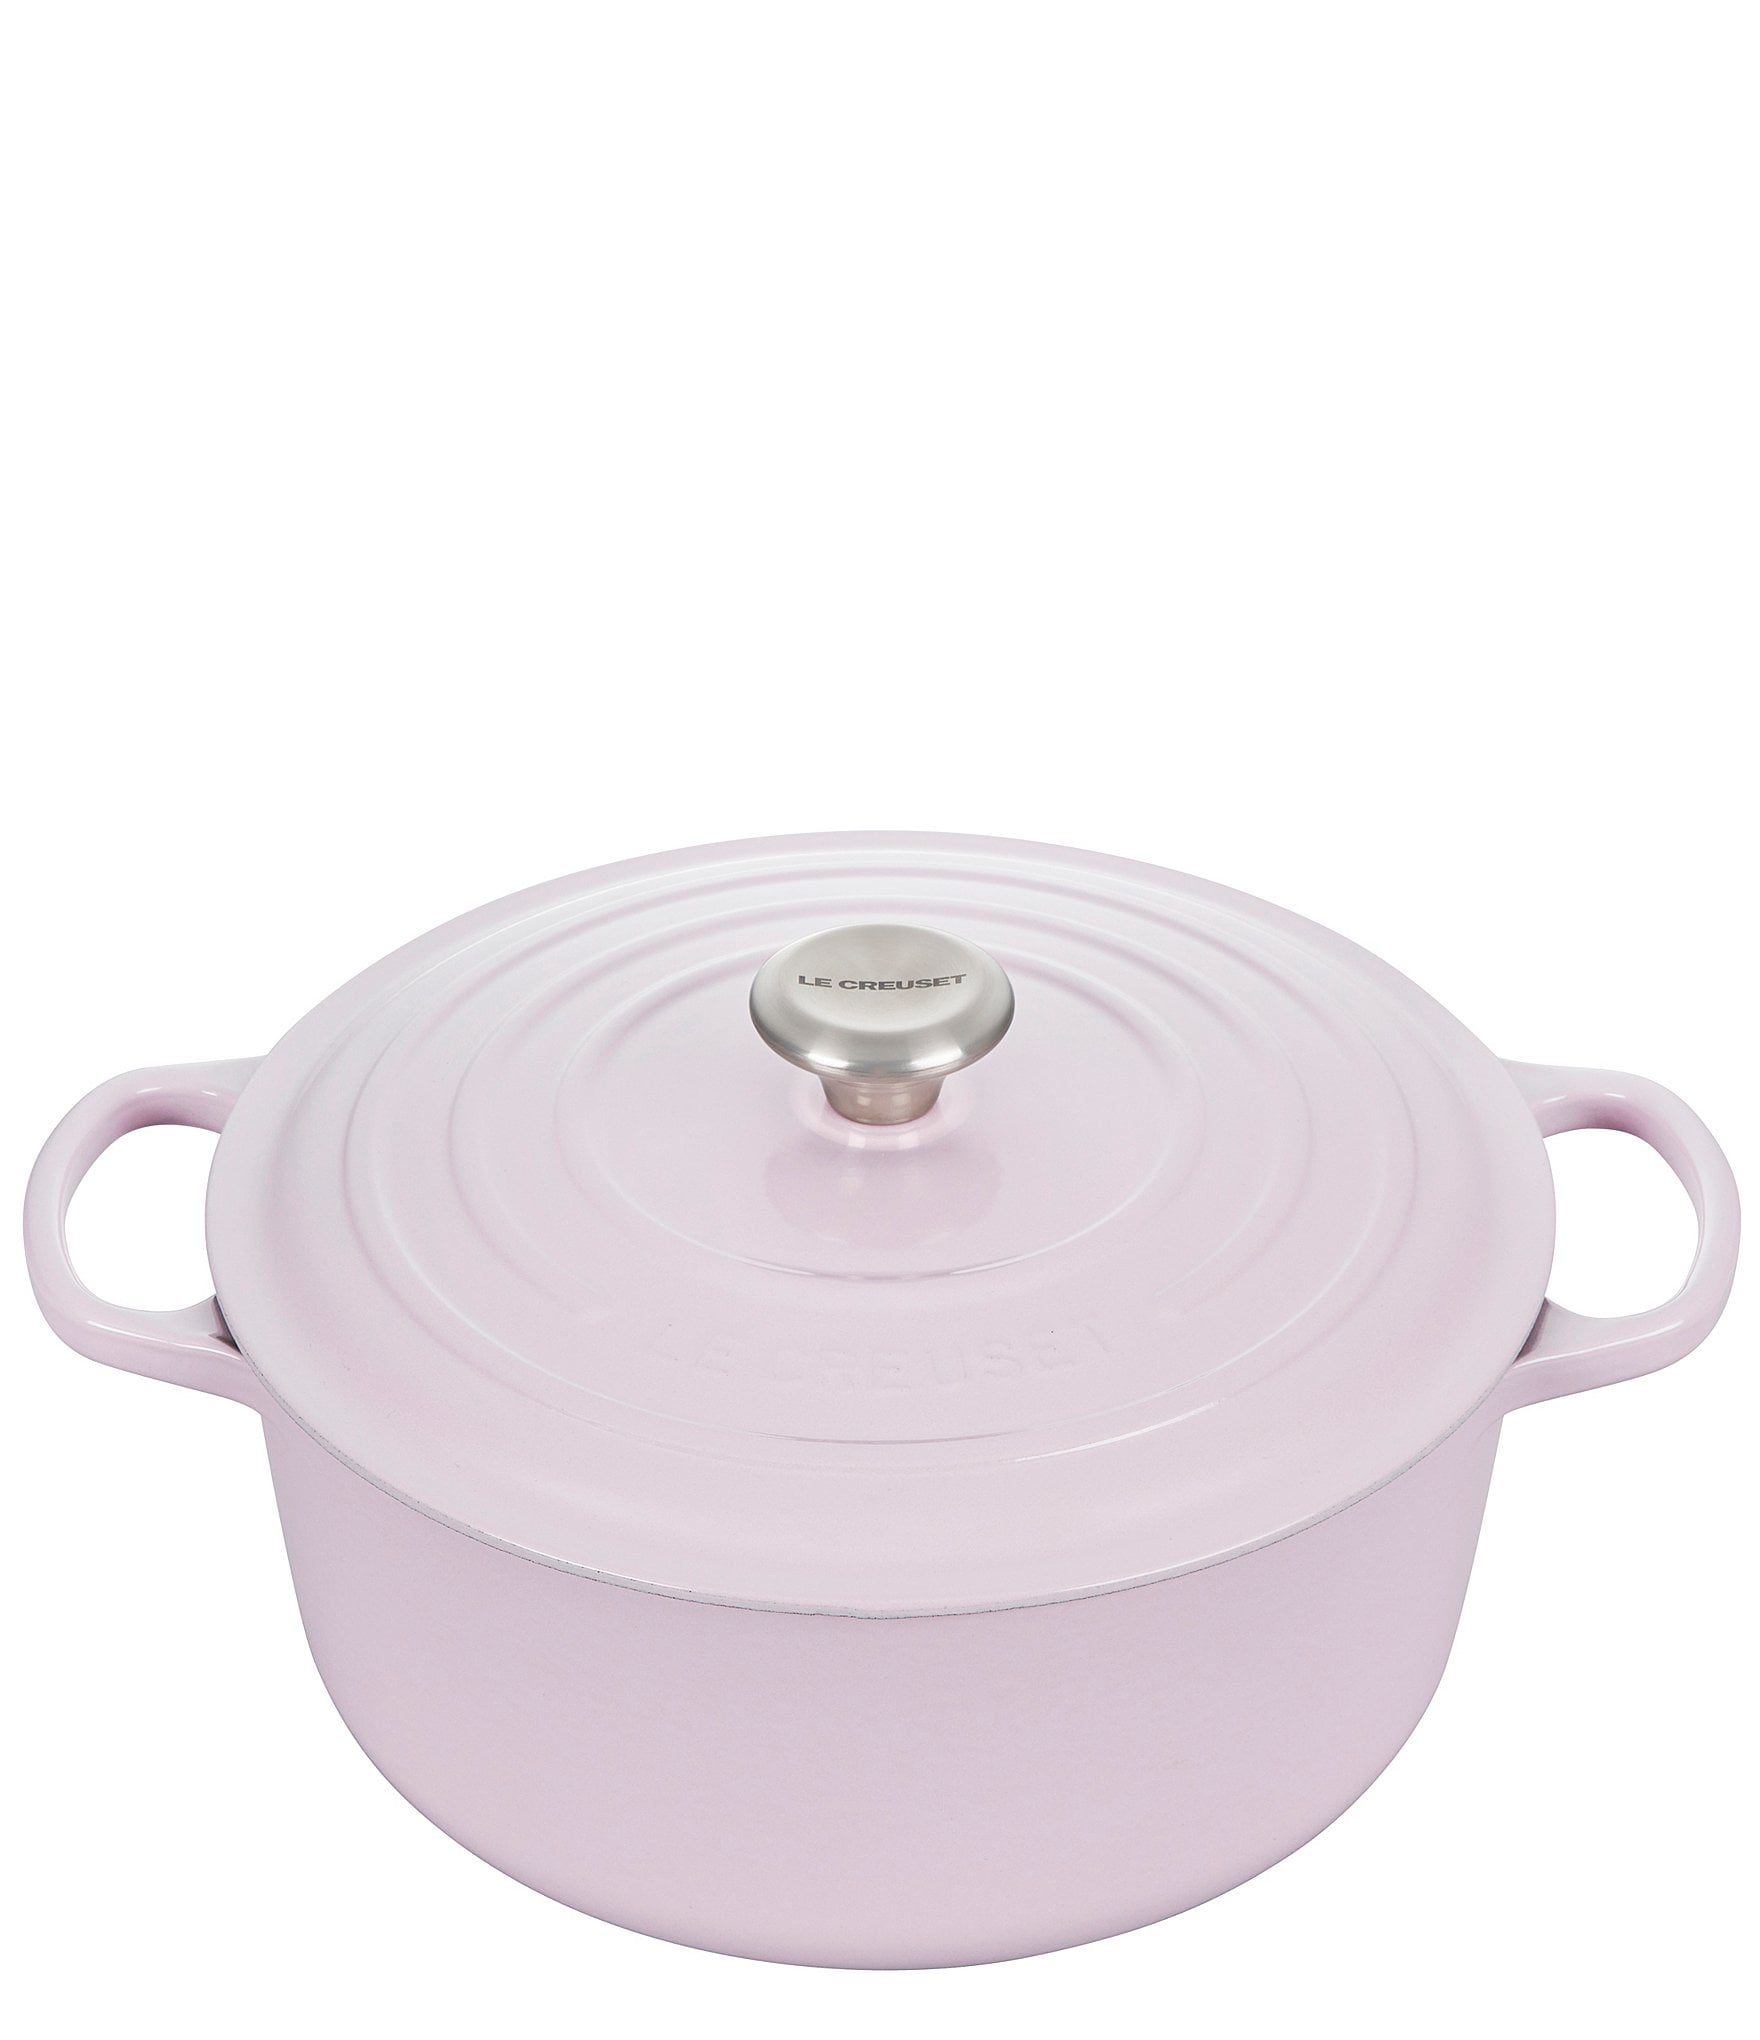 https://dimg.dillards.com/is/image/DillardsZoom/zoom/le-creuset-7.5-qt-round-enameled-cast-iron-dutch-oven-with-stainless-steel-knobs/00000000_zi_2313e31e-4d31-49a6-b142-e4f0a5addae9.jpg